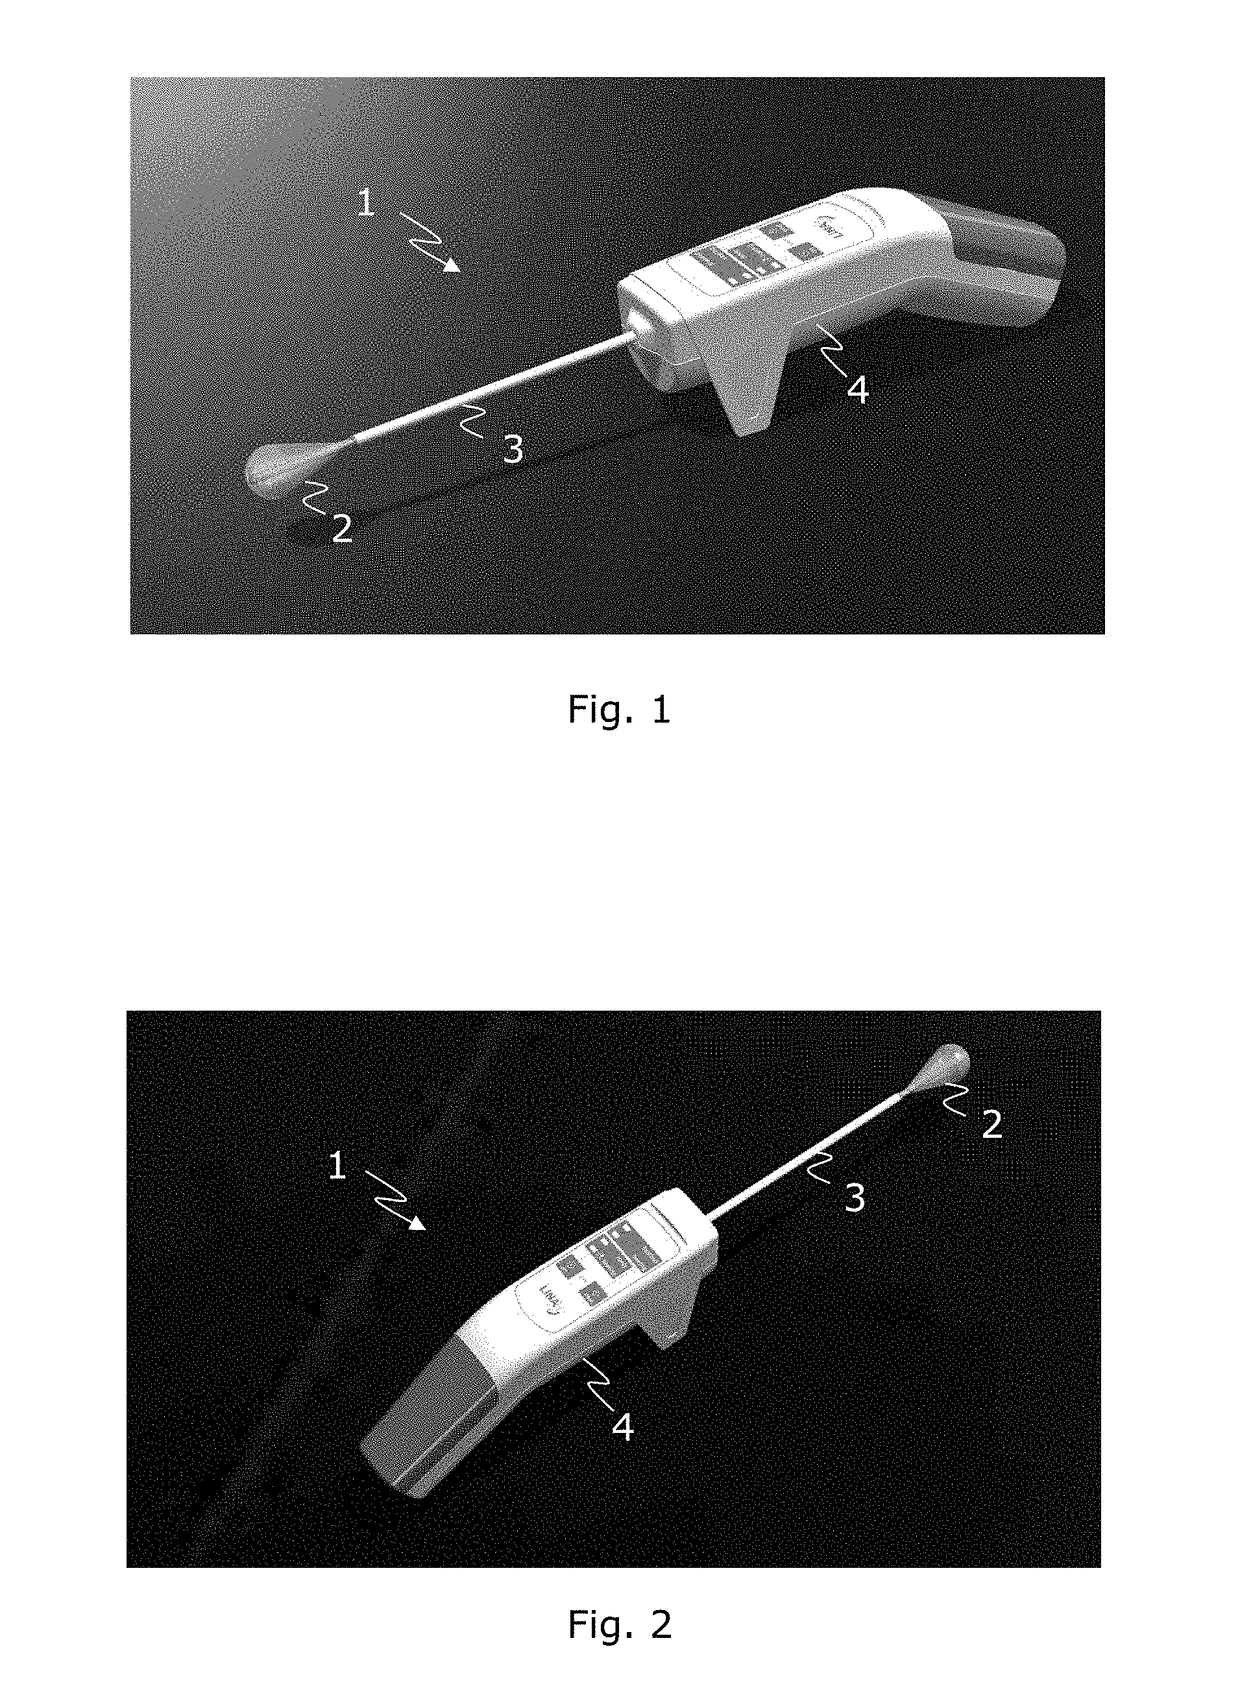 An apparatus for thermal ablation